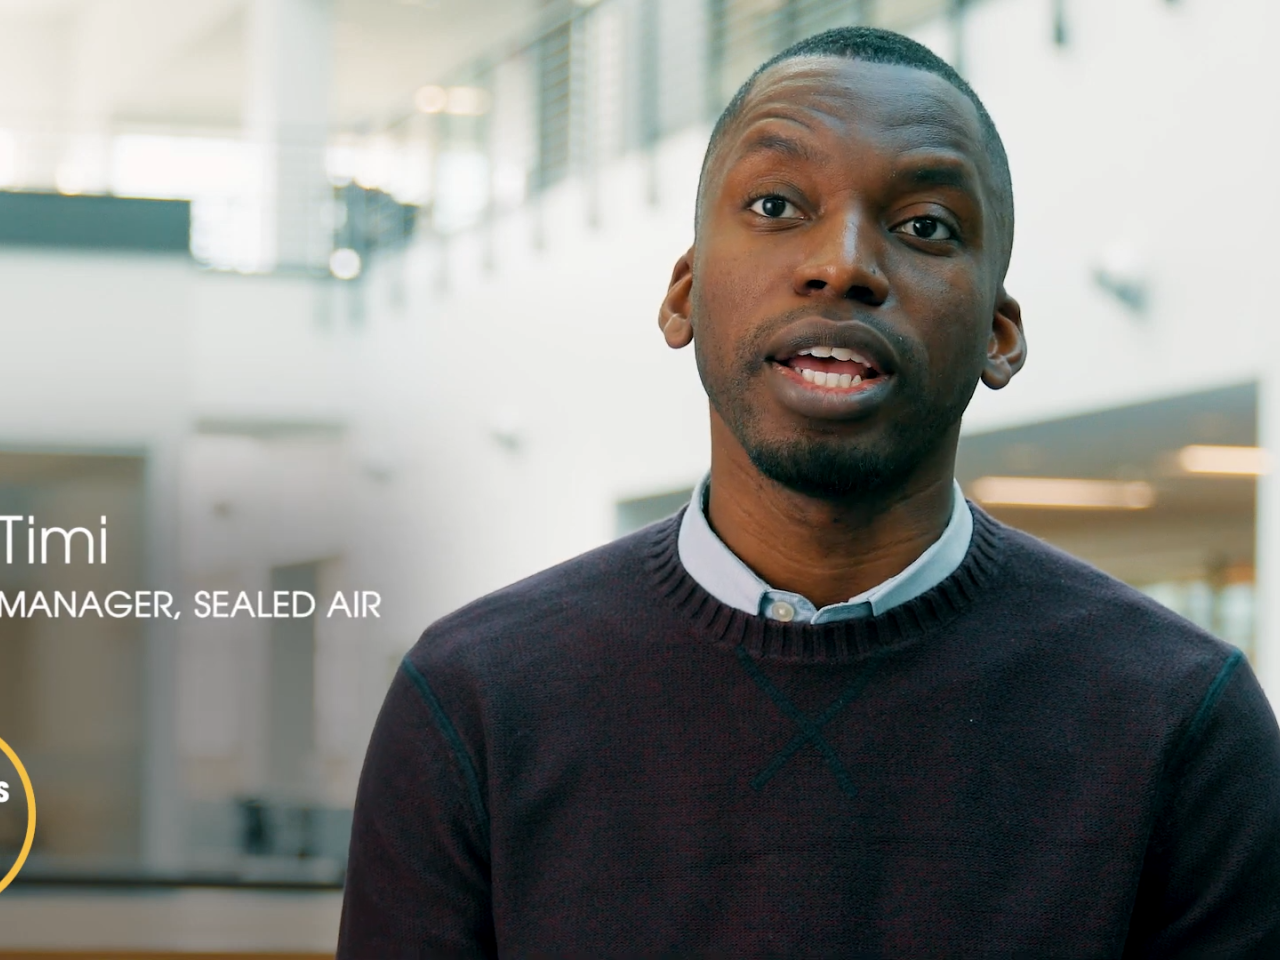 Timi, Manager, Sealed Air